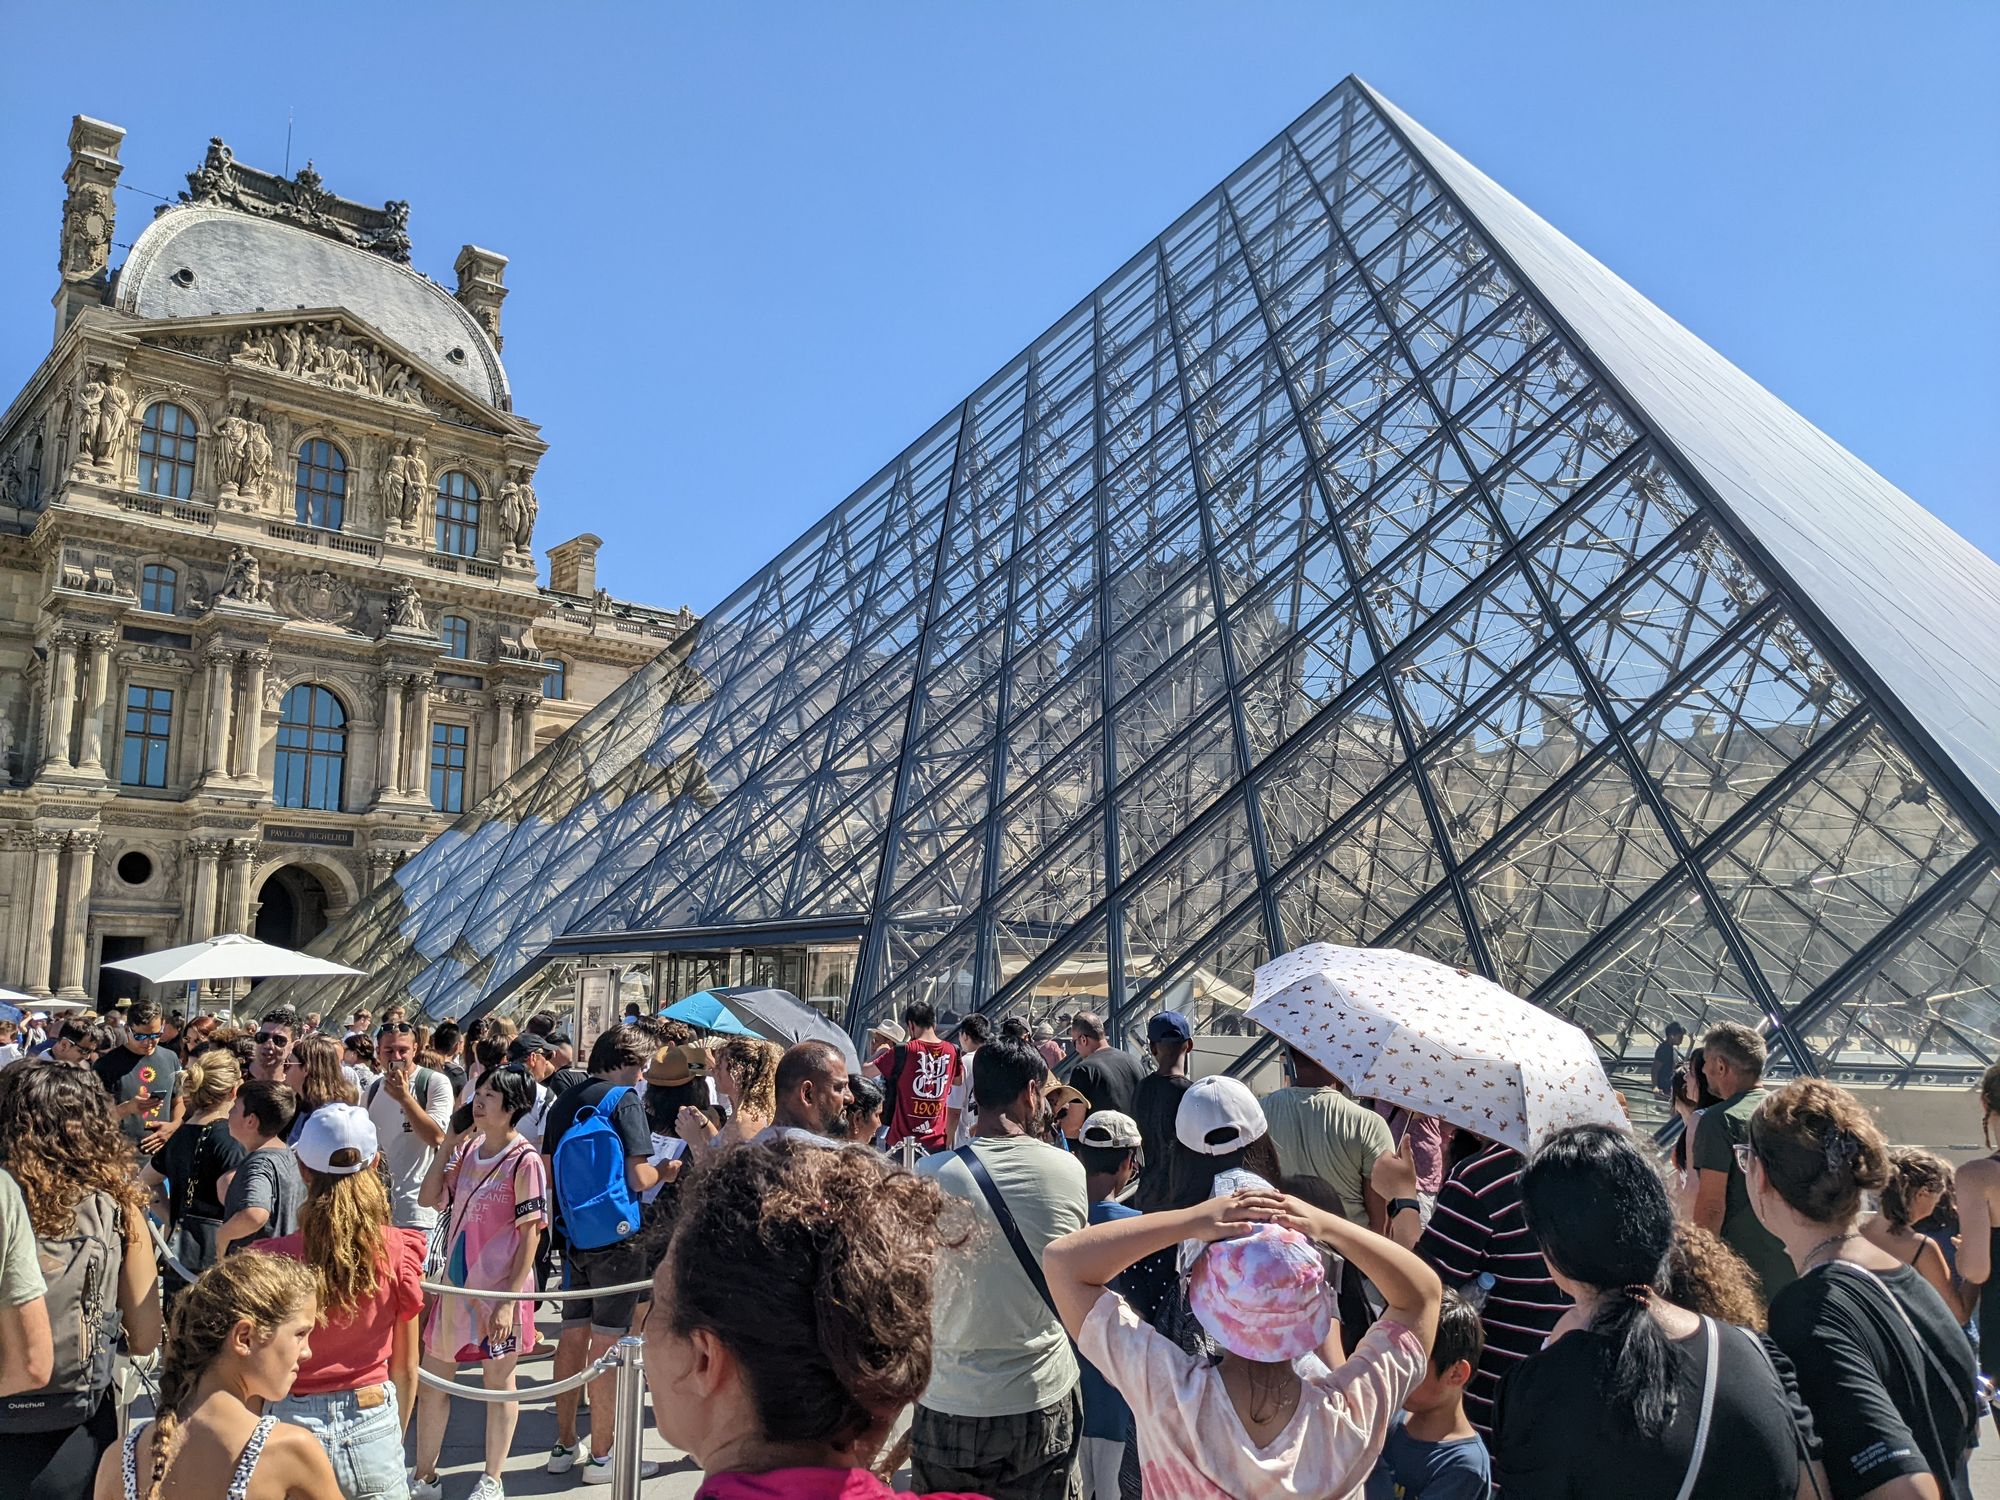 The Pyramid entrance to the Louvre Museum in July 2022.